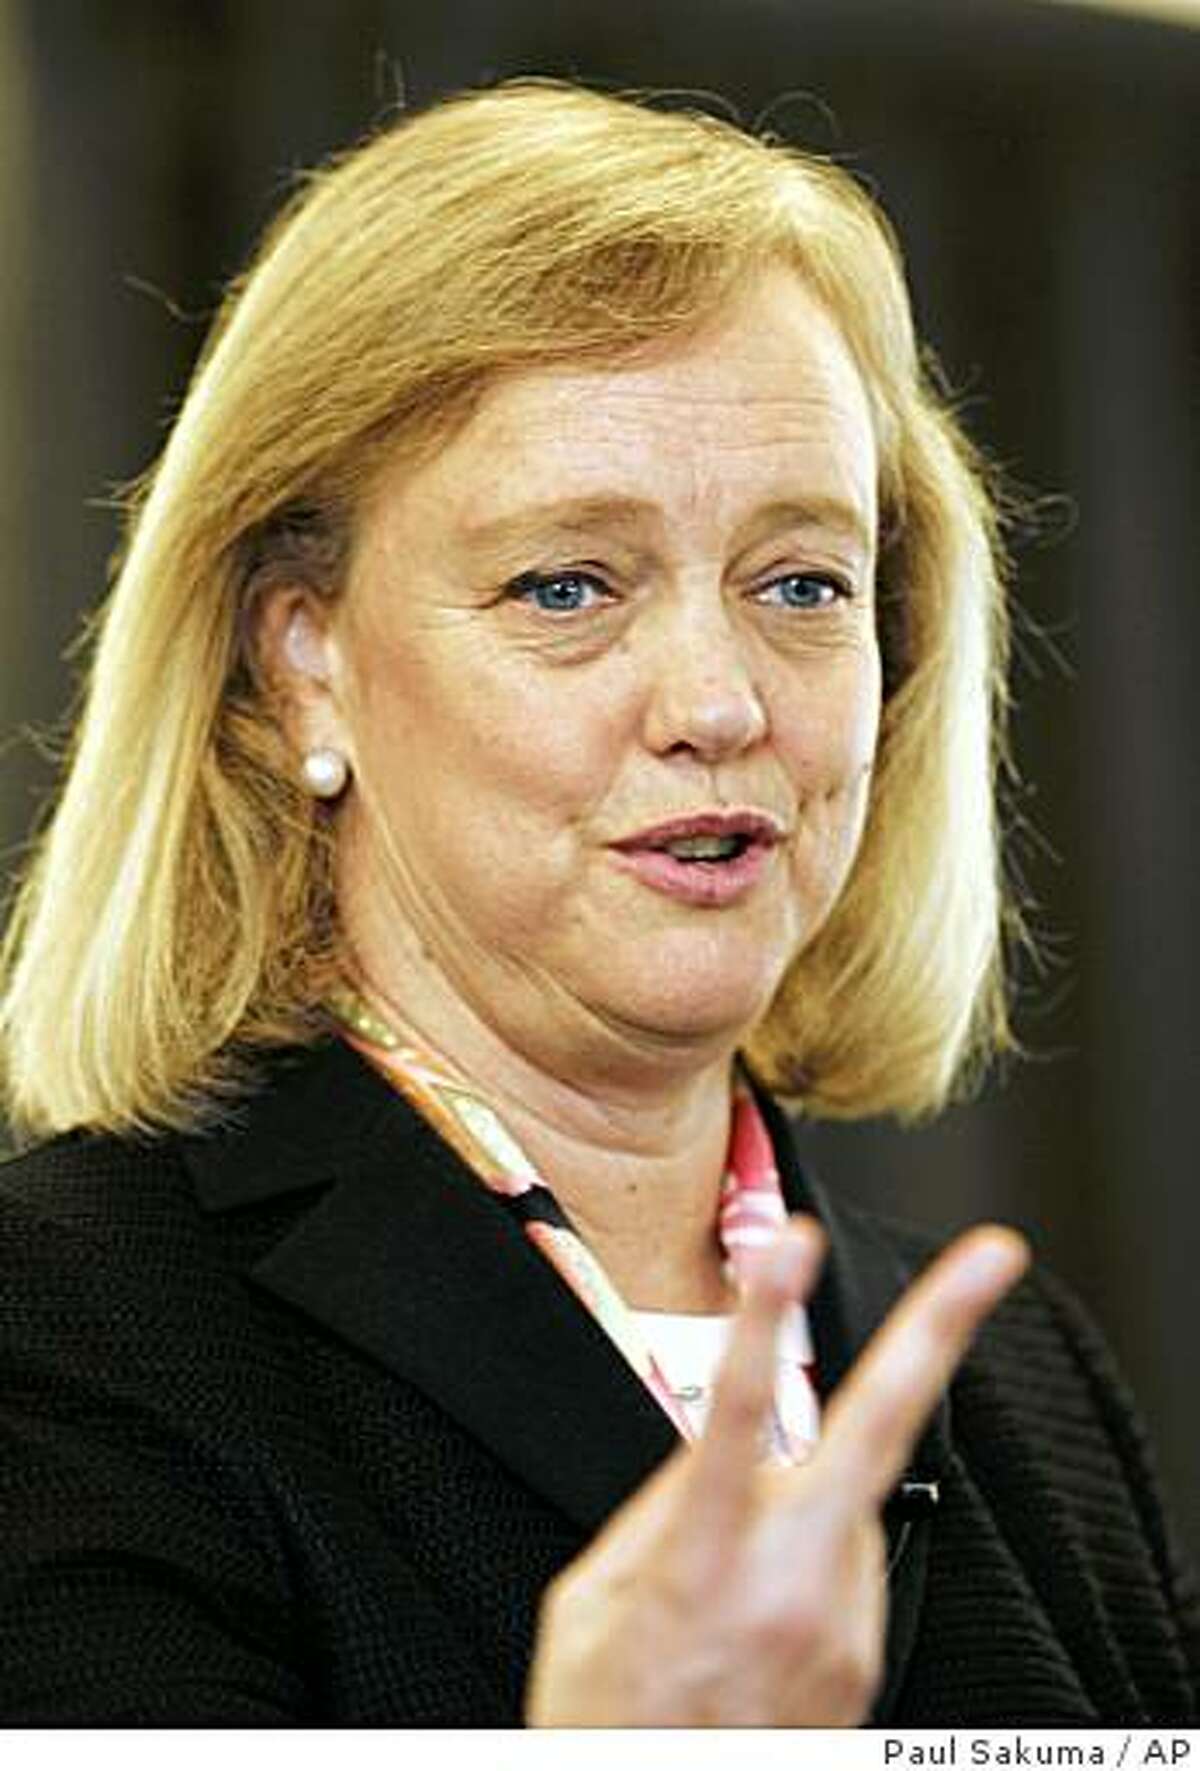 California Republican Gubernatorial candidate and former eBay CEO Meg Whitman speaks at the Silicon Valley Leadership Forum at Yahoo headquarter in Sunnyvale, Calif., Monday, April 27, 2009. (AP Photo/Paul Sakuma)